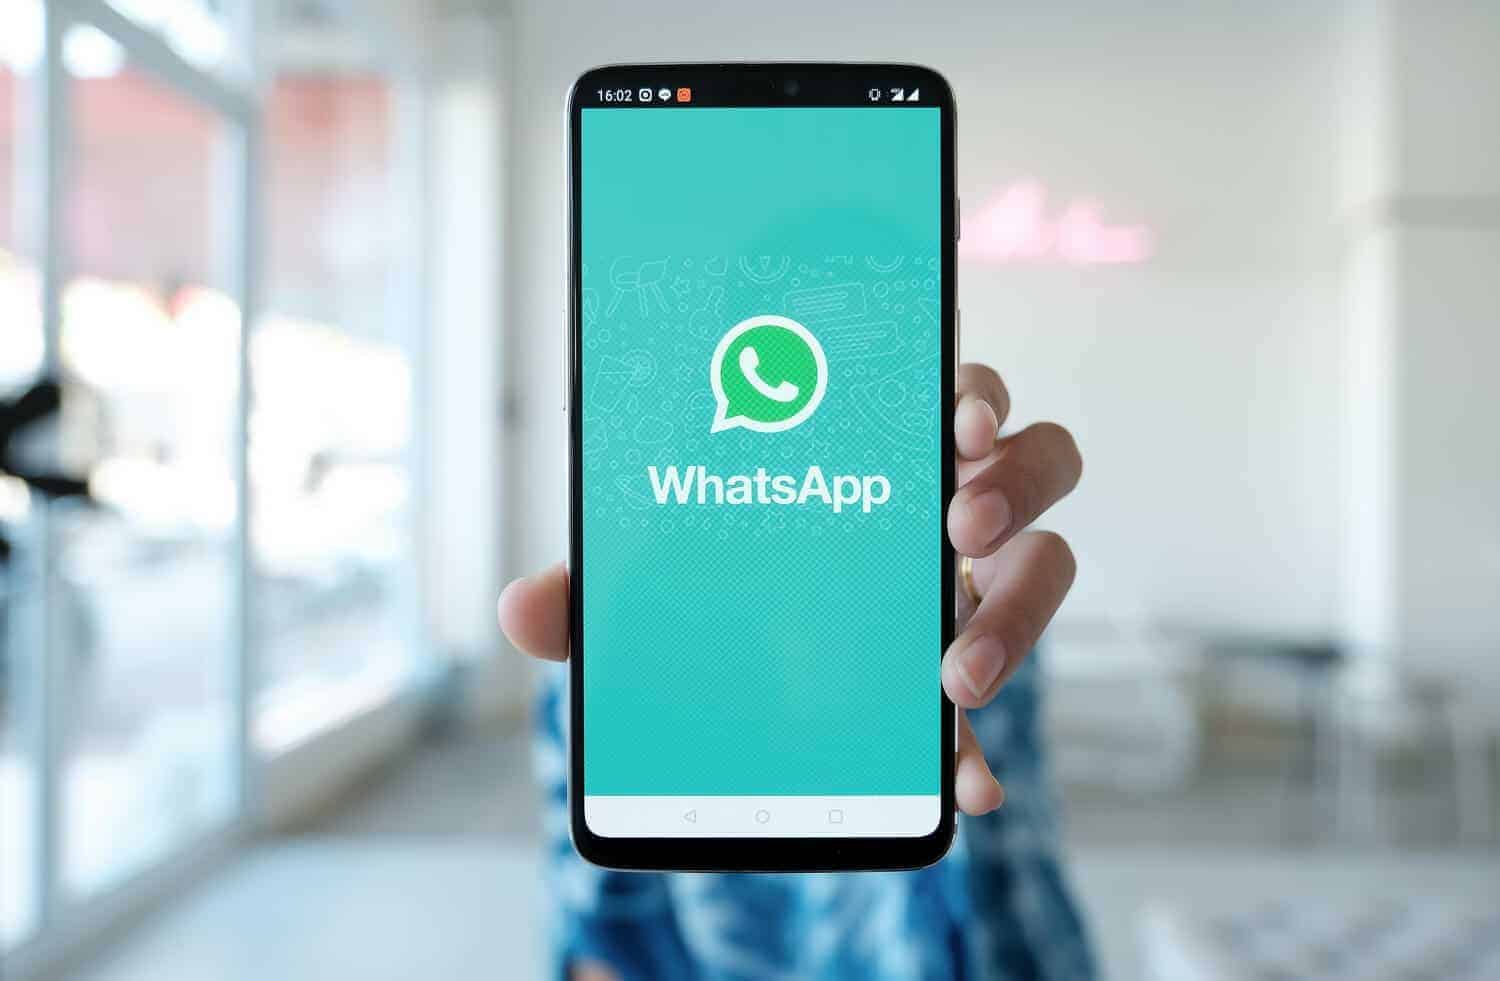 Why use WhatsApp to sell homes?